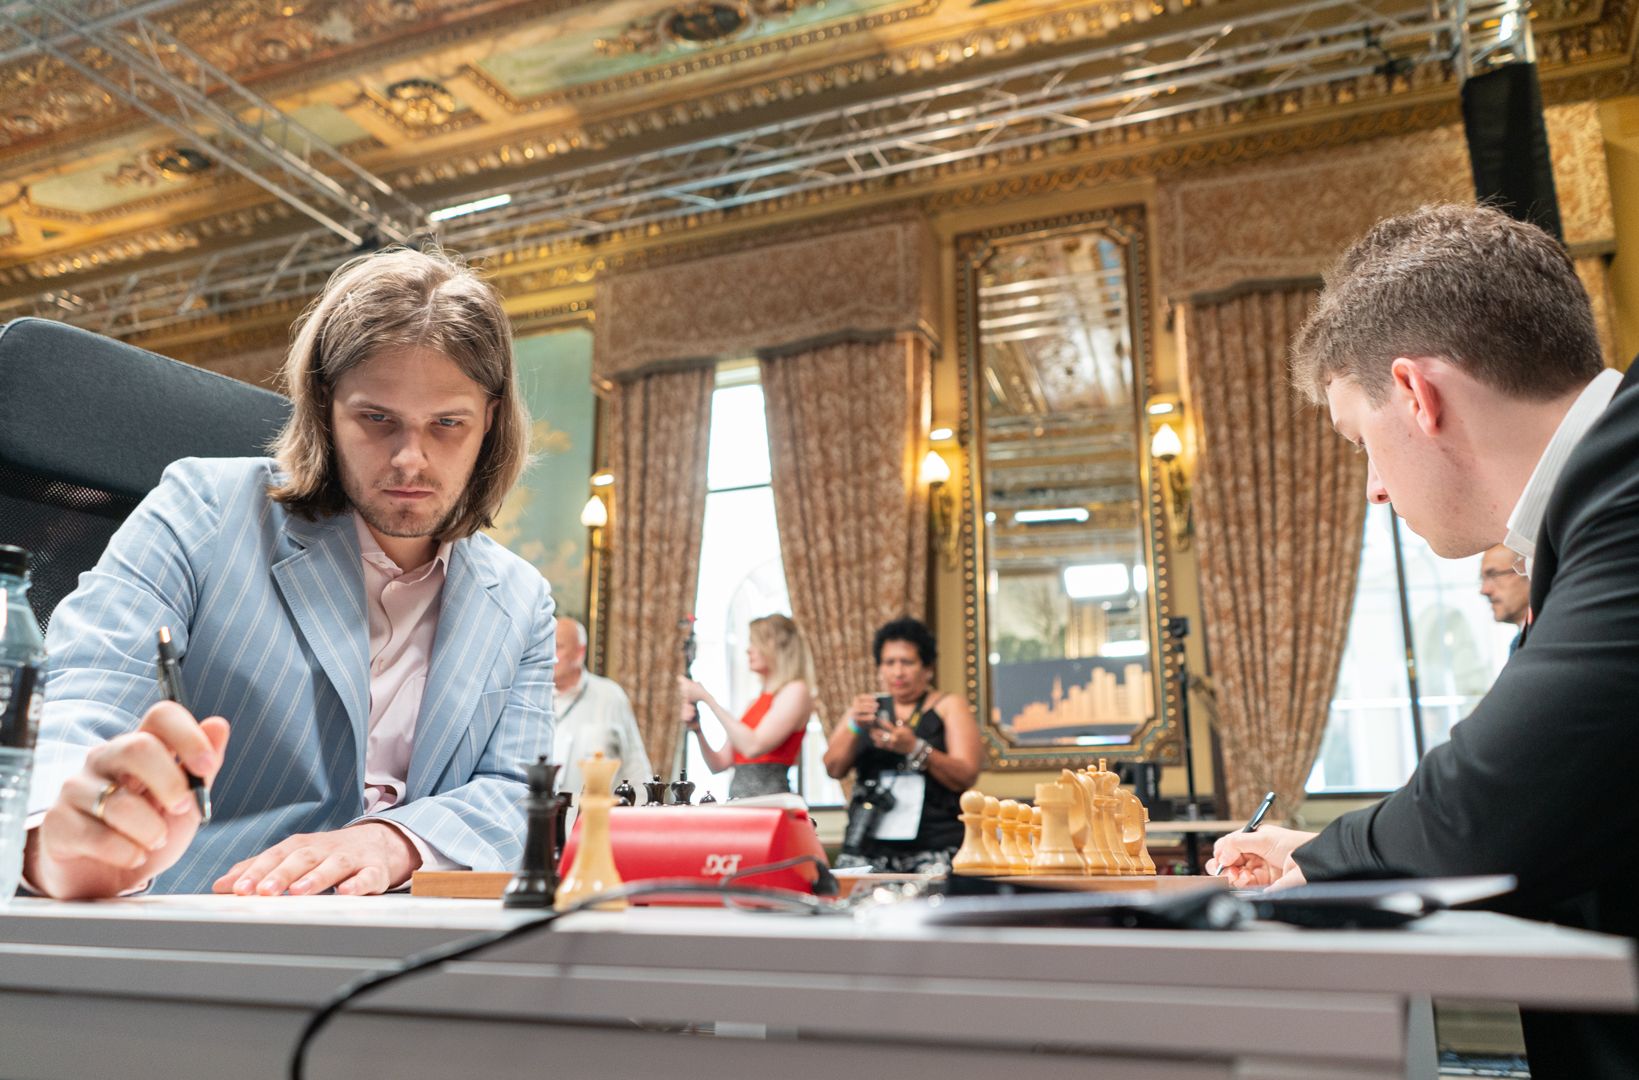 Richard Rapport and Jan-Krzysztof Duda in the first round of the 2022 Candidates Tournament